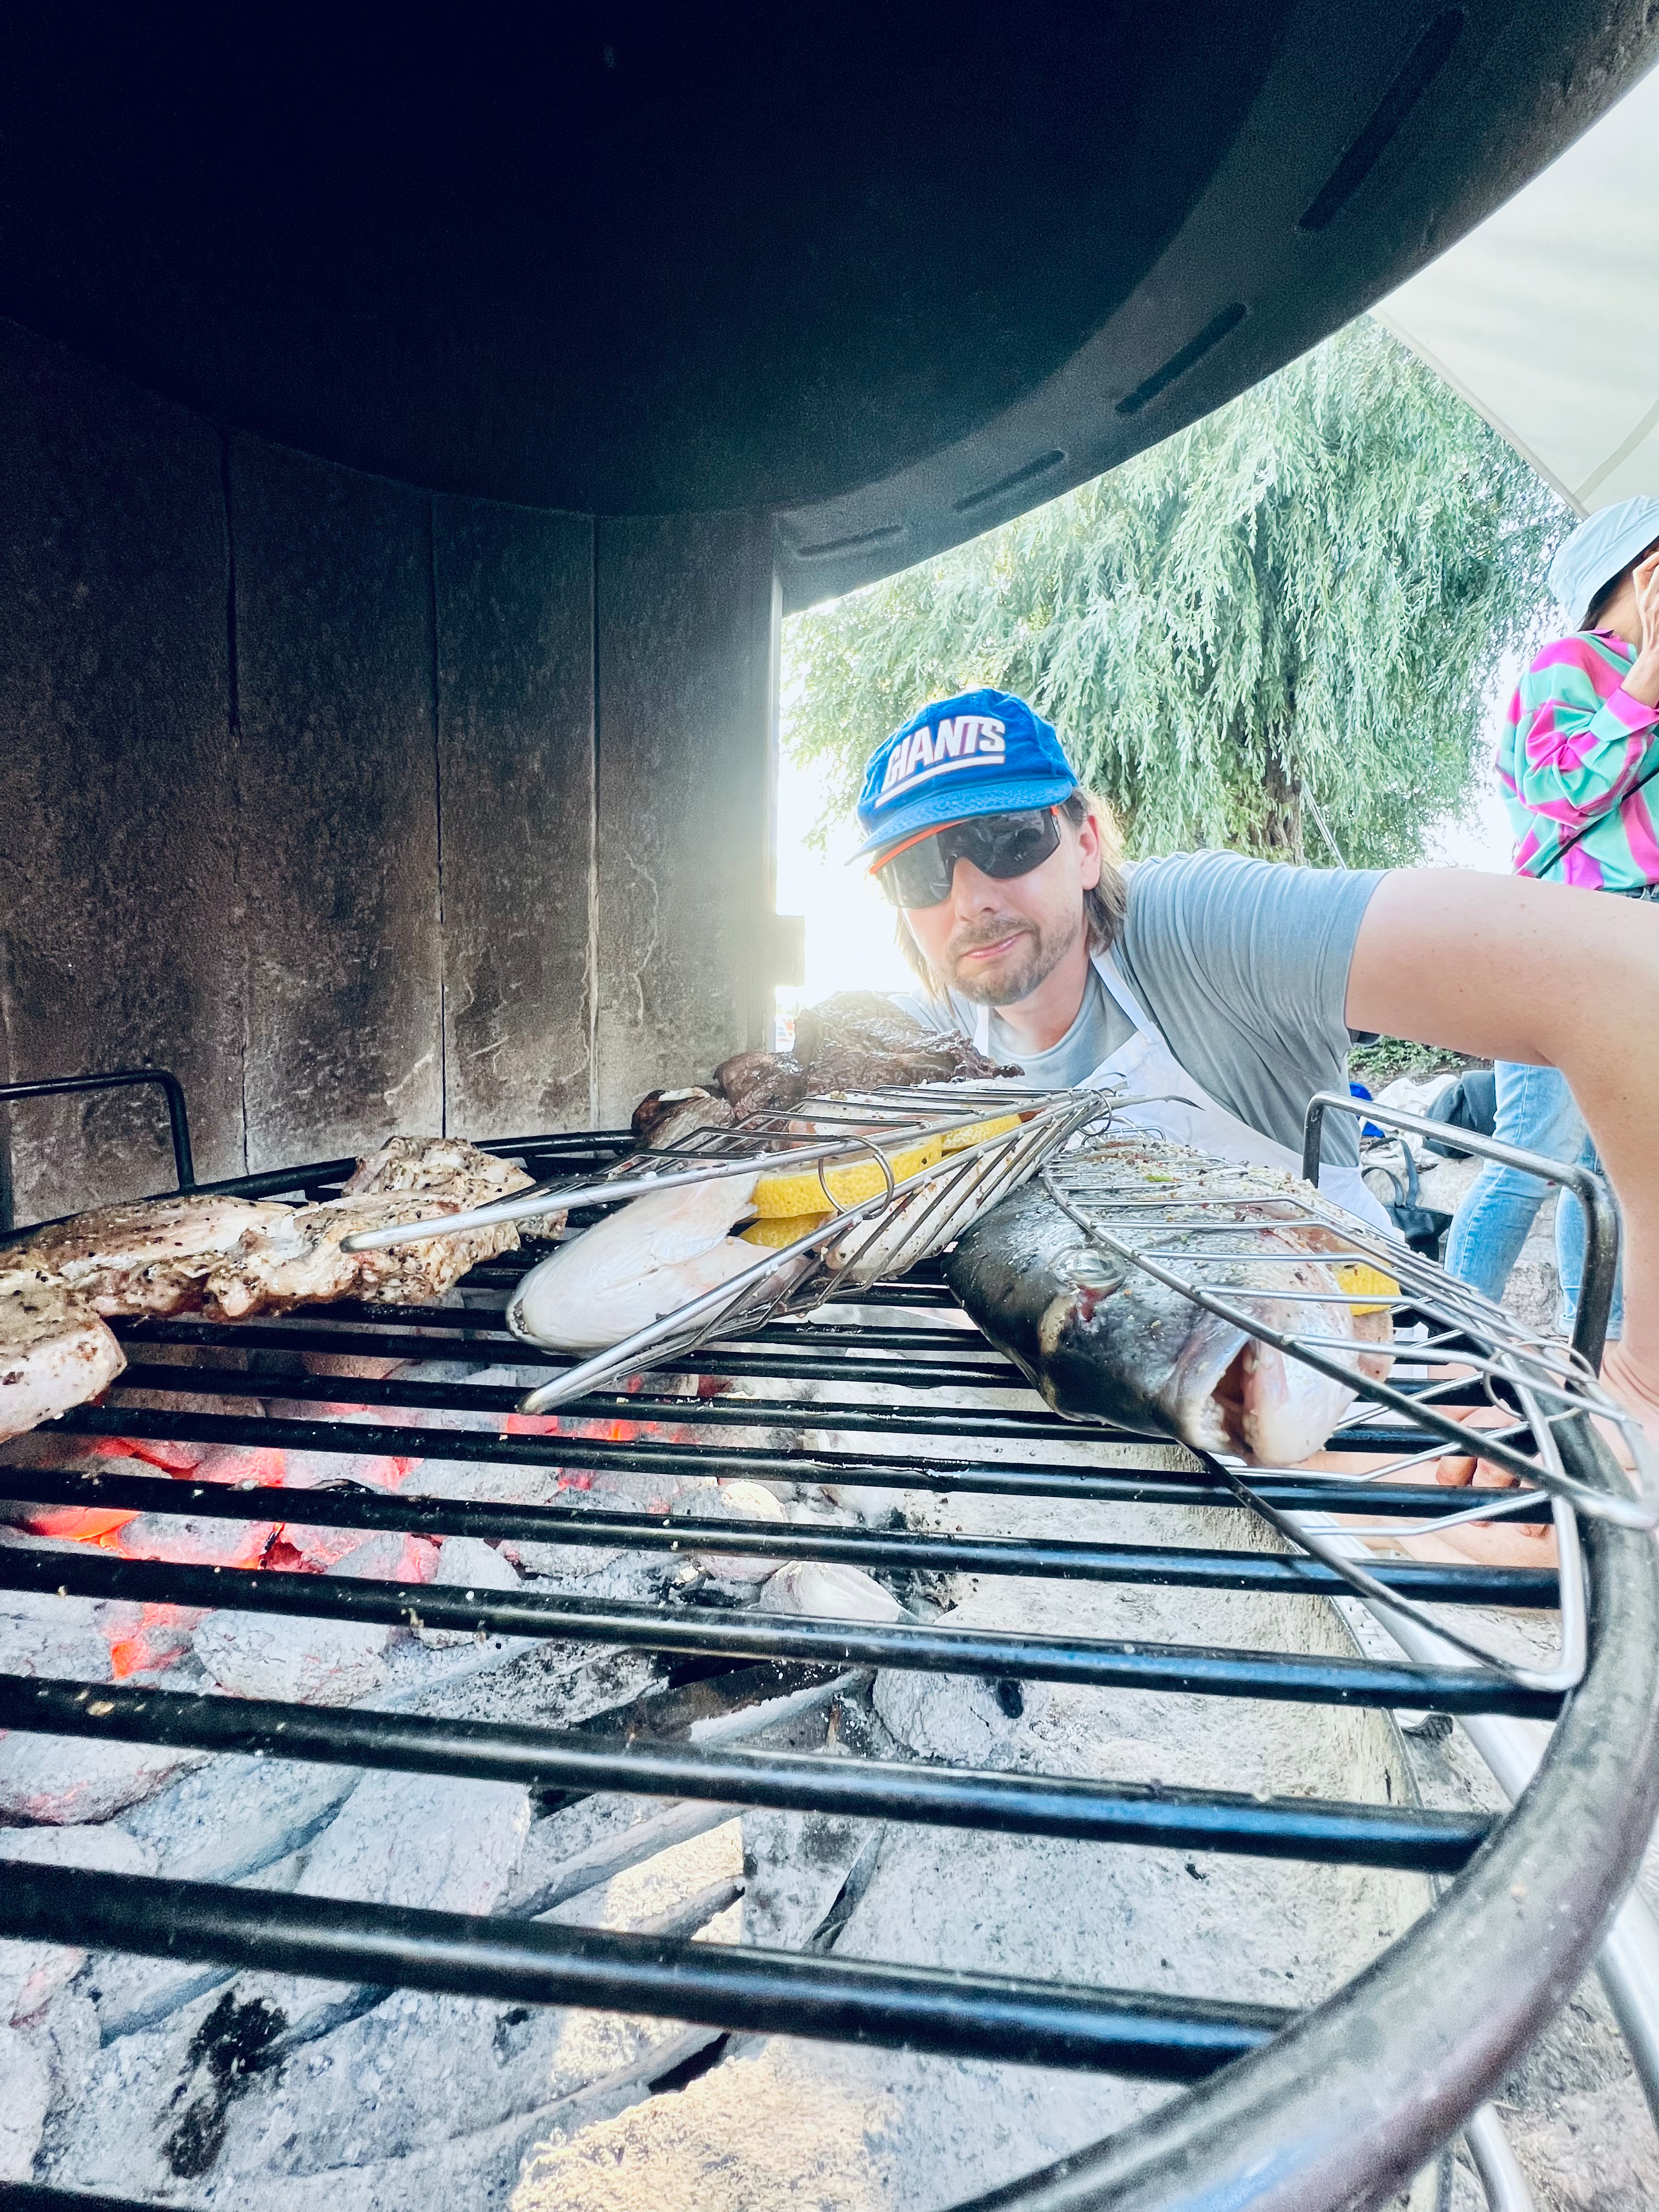 Image of an employee with sunglasses and cap from Jung von Matt SPREE posing in front of a charcoal grill on which two fish are being grilled.